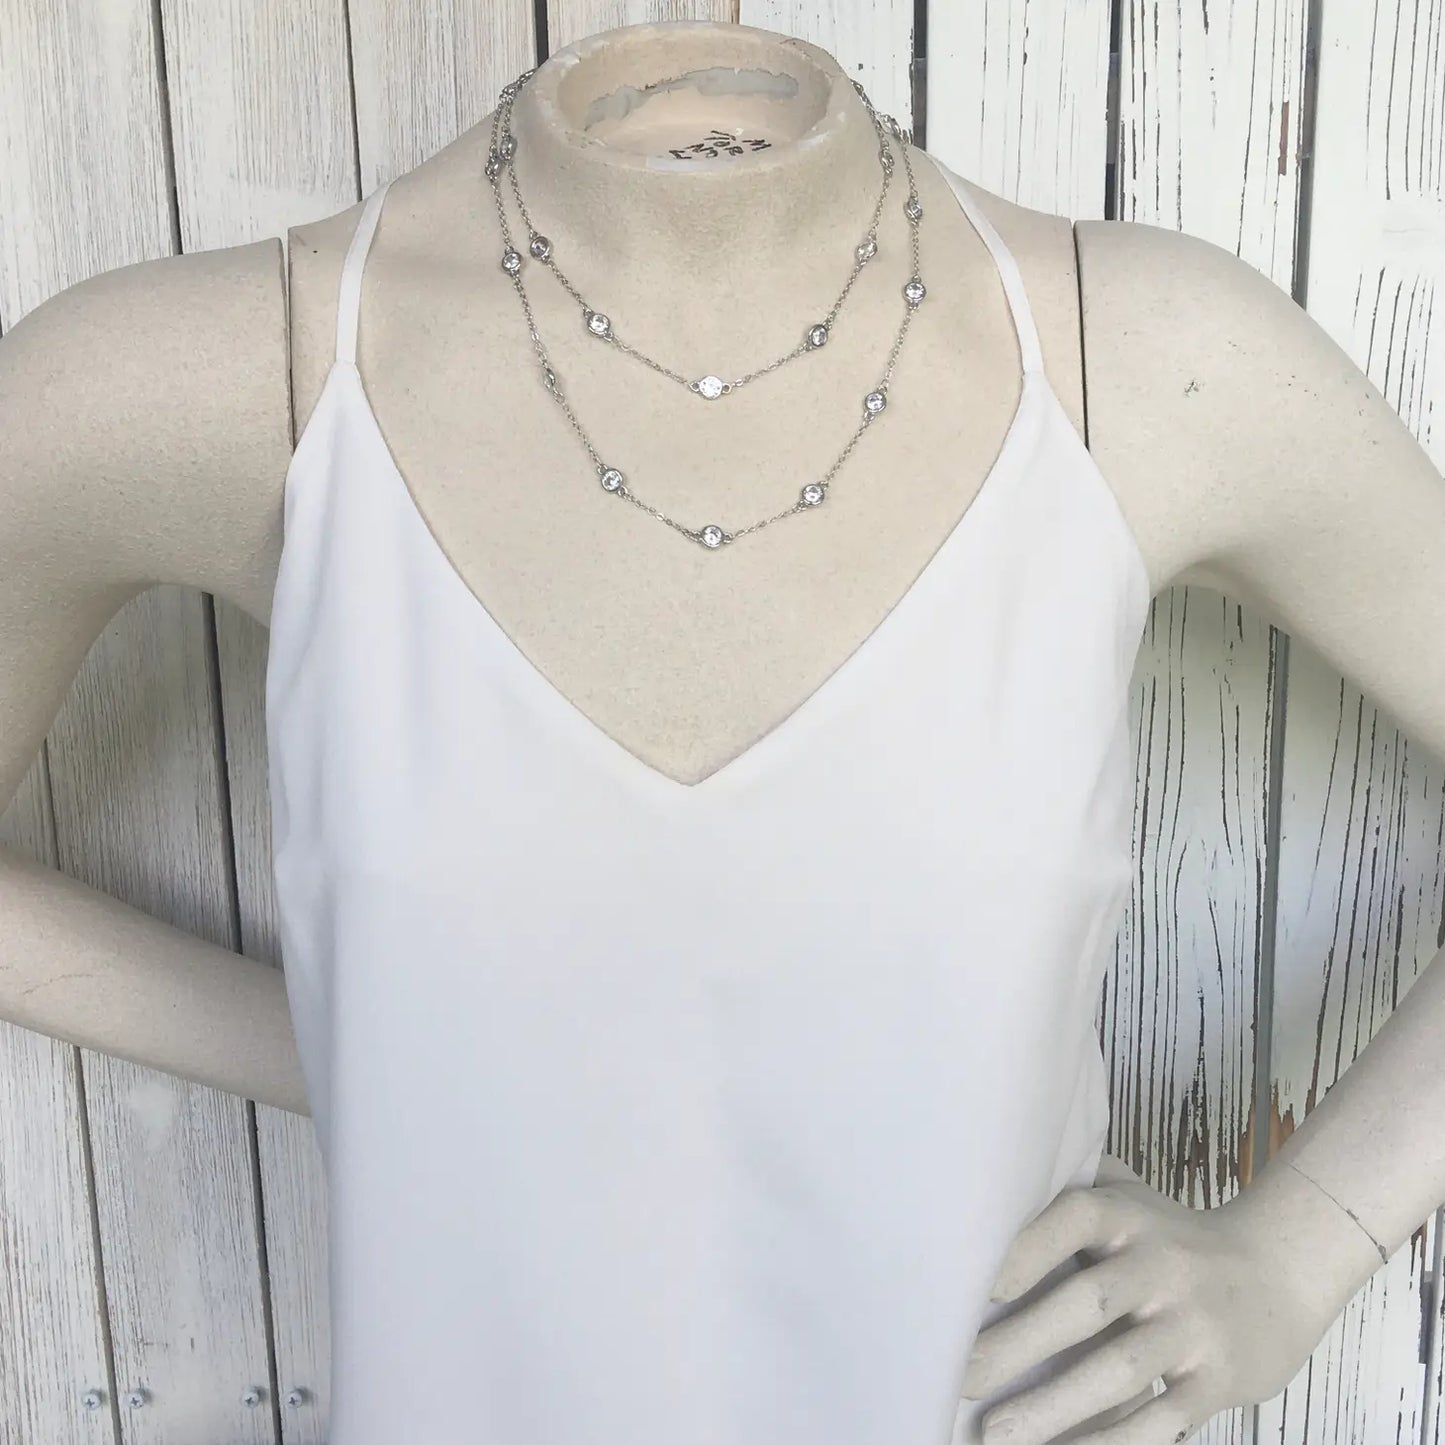 Silver and Crystal Necklace Boutique